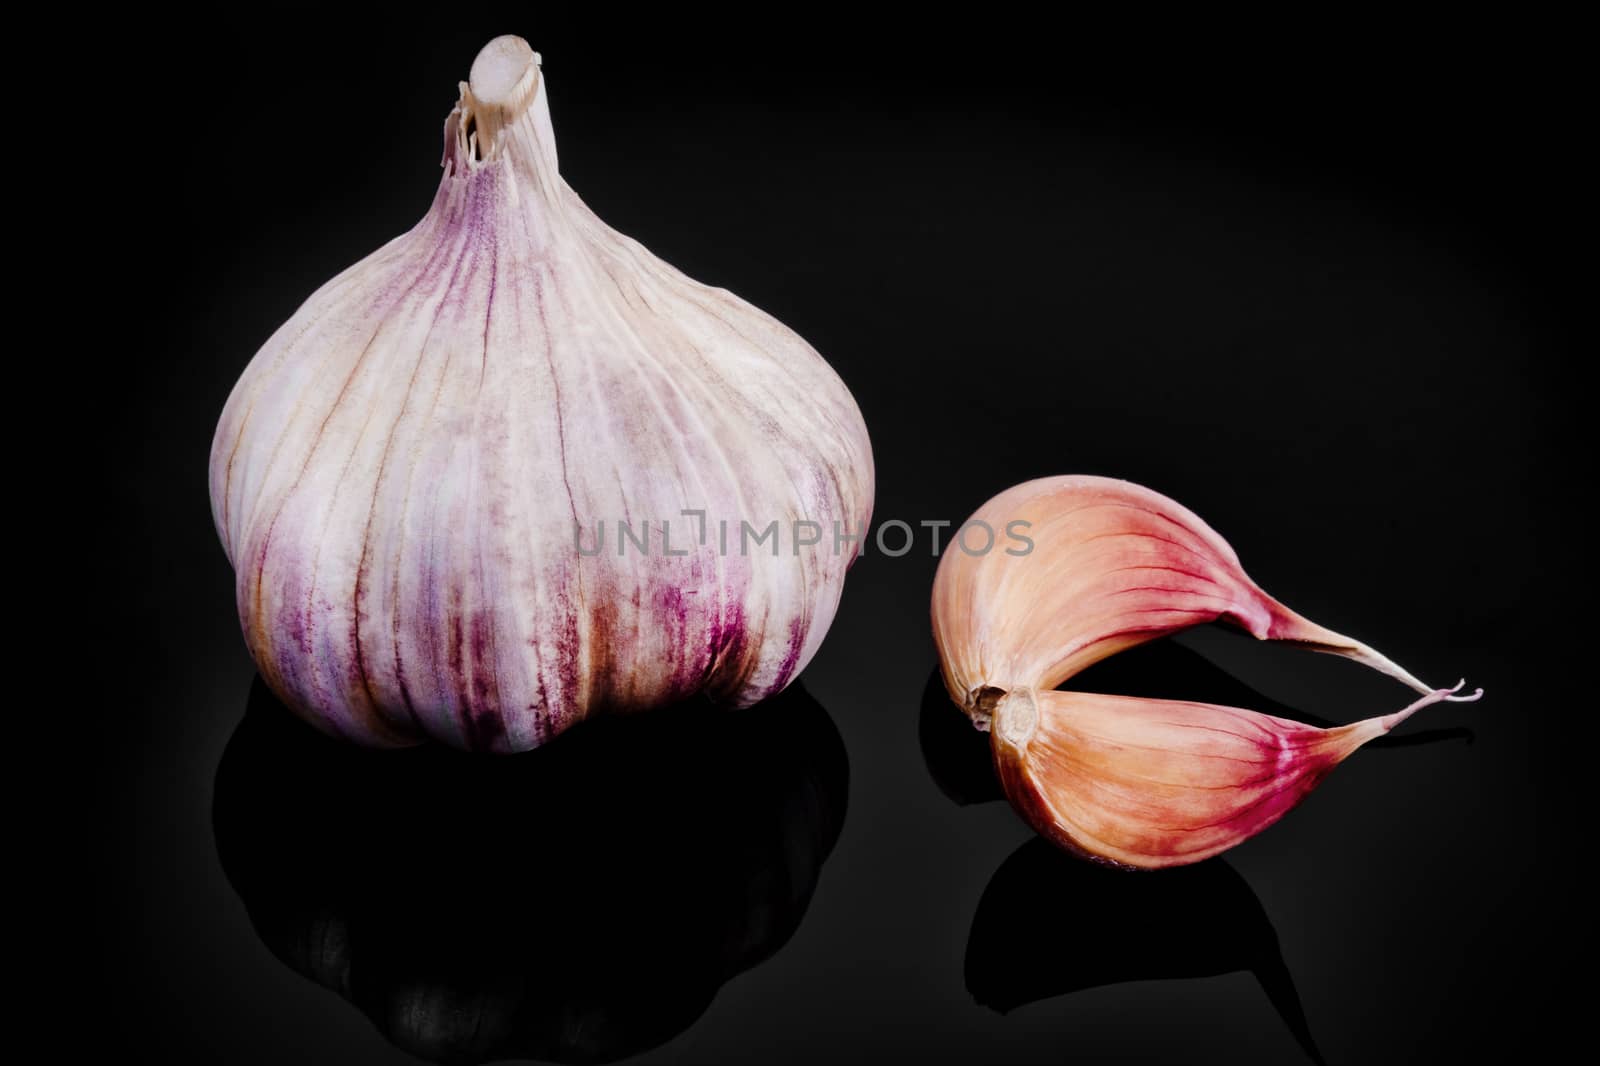 Close-up of garlic with reflection on black background.